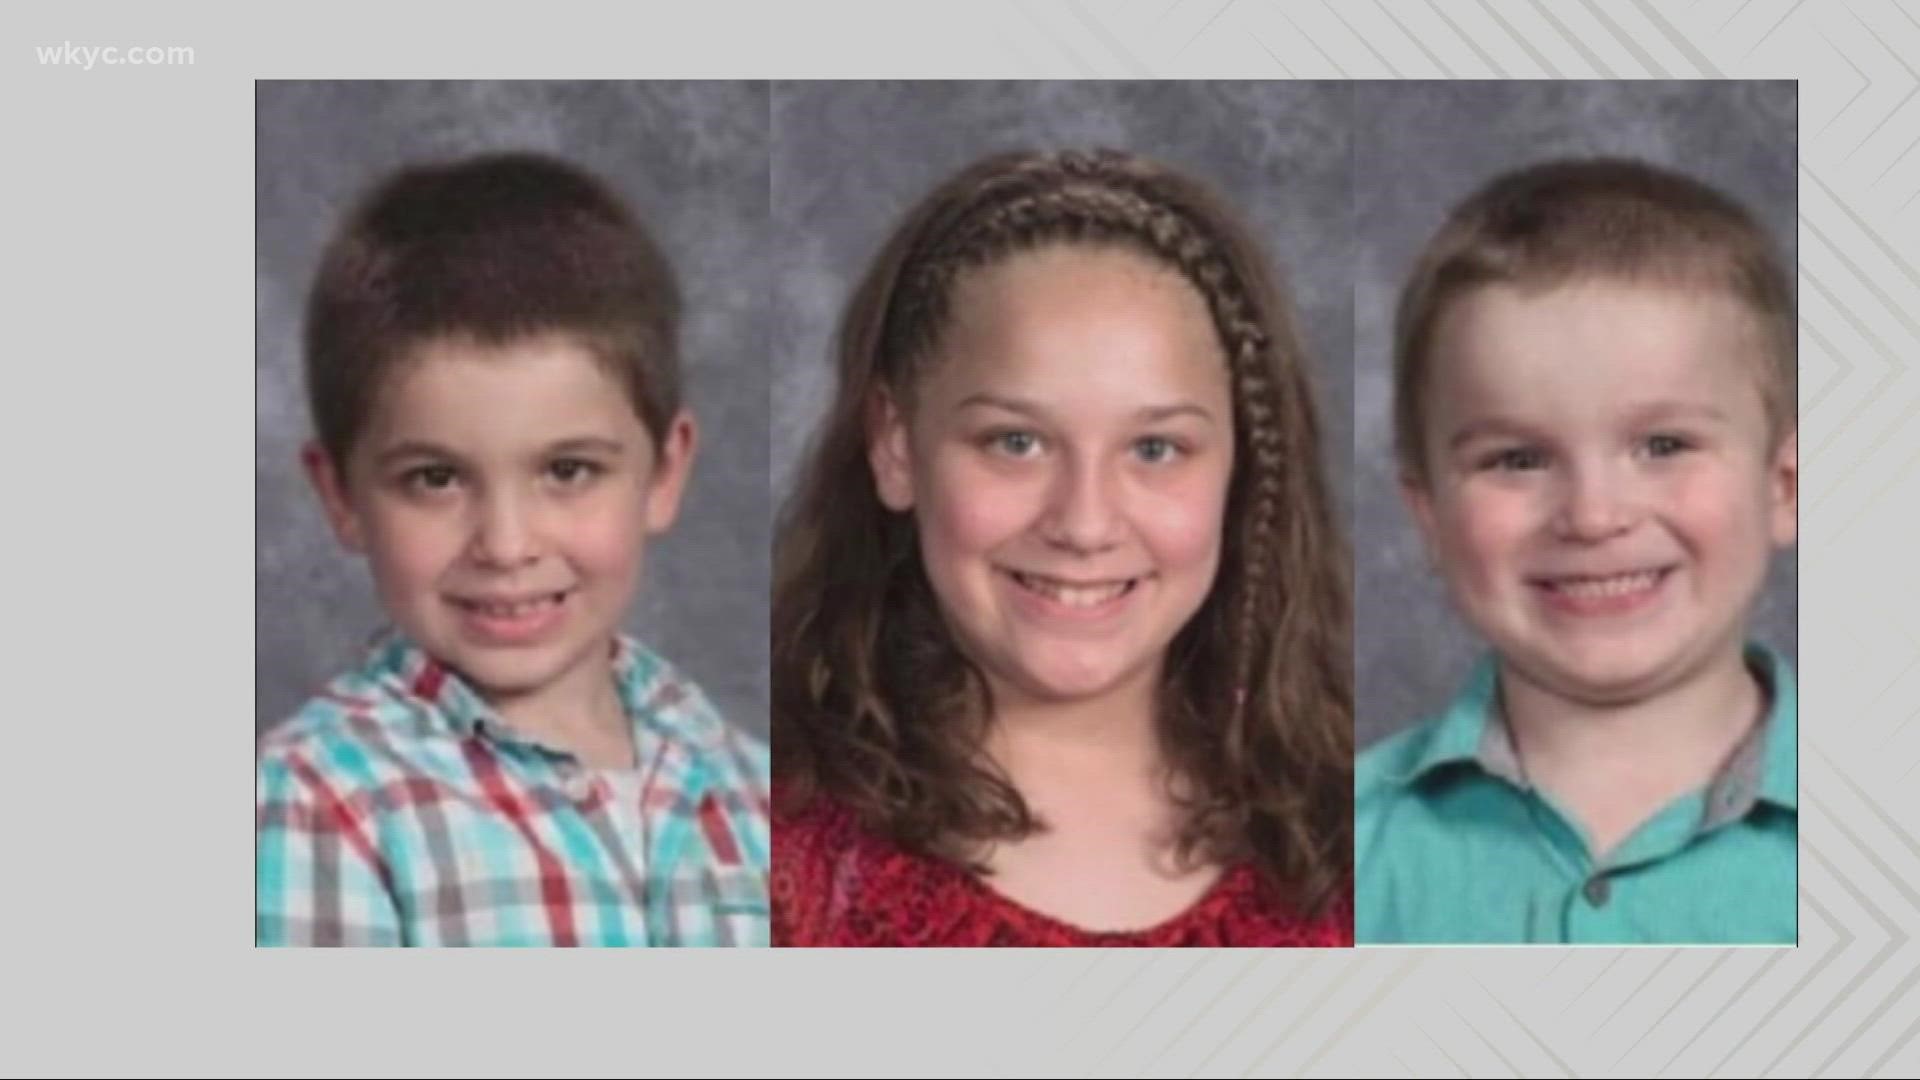 Isabel, Remmington, and Wyatt Cruz were safely found by members of the California Highway Patrol. They had last been seen in Shreve on Wednesday.